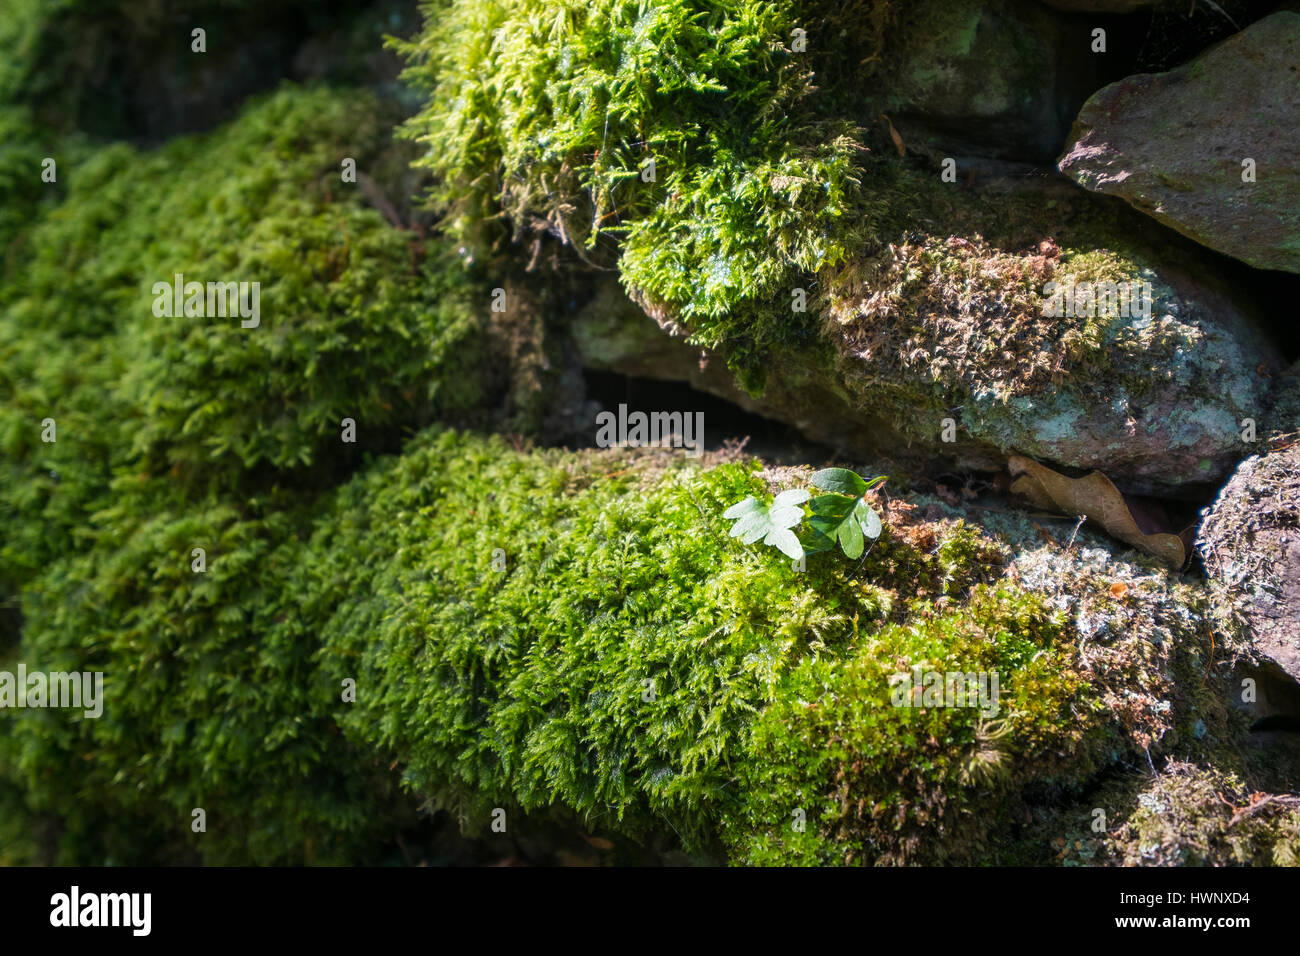 Moss and leaves lit by sunlight on a dry stone wall. Stock Photo